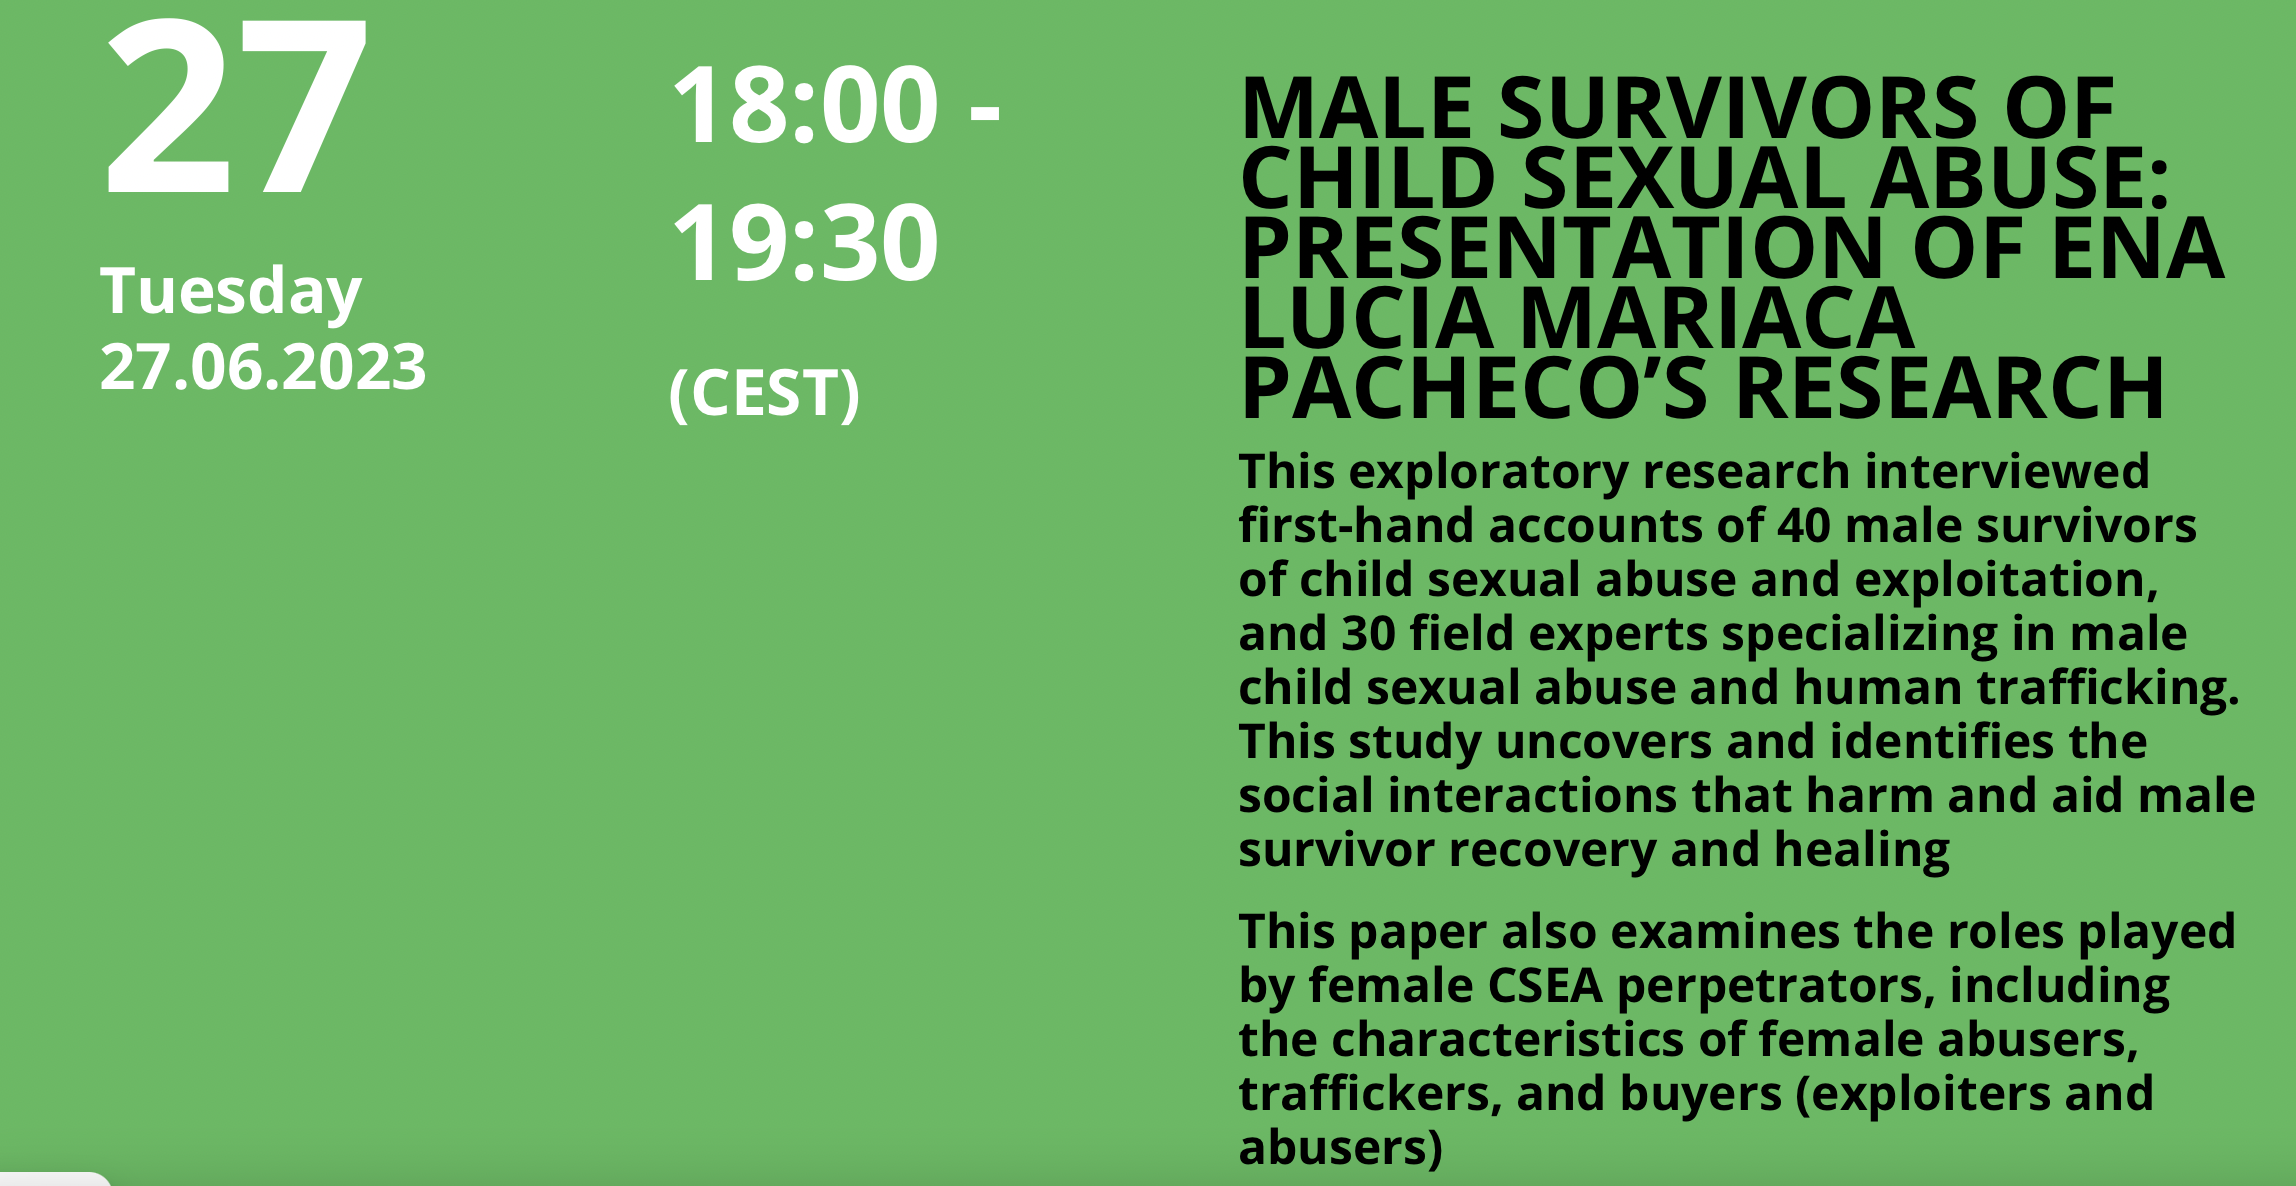 MALE SURVIVORS OF CHILD SEXUAL ABUSE: PRESENTATION OF ENA LUCIA MARIACA PACHECO’S RESEARCH